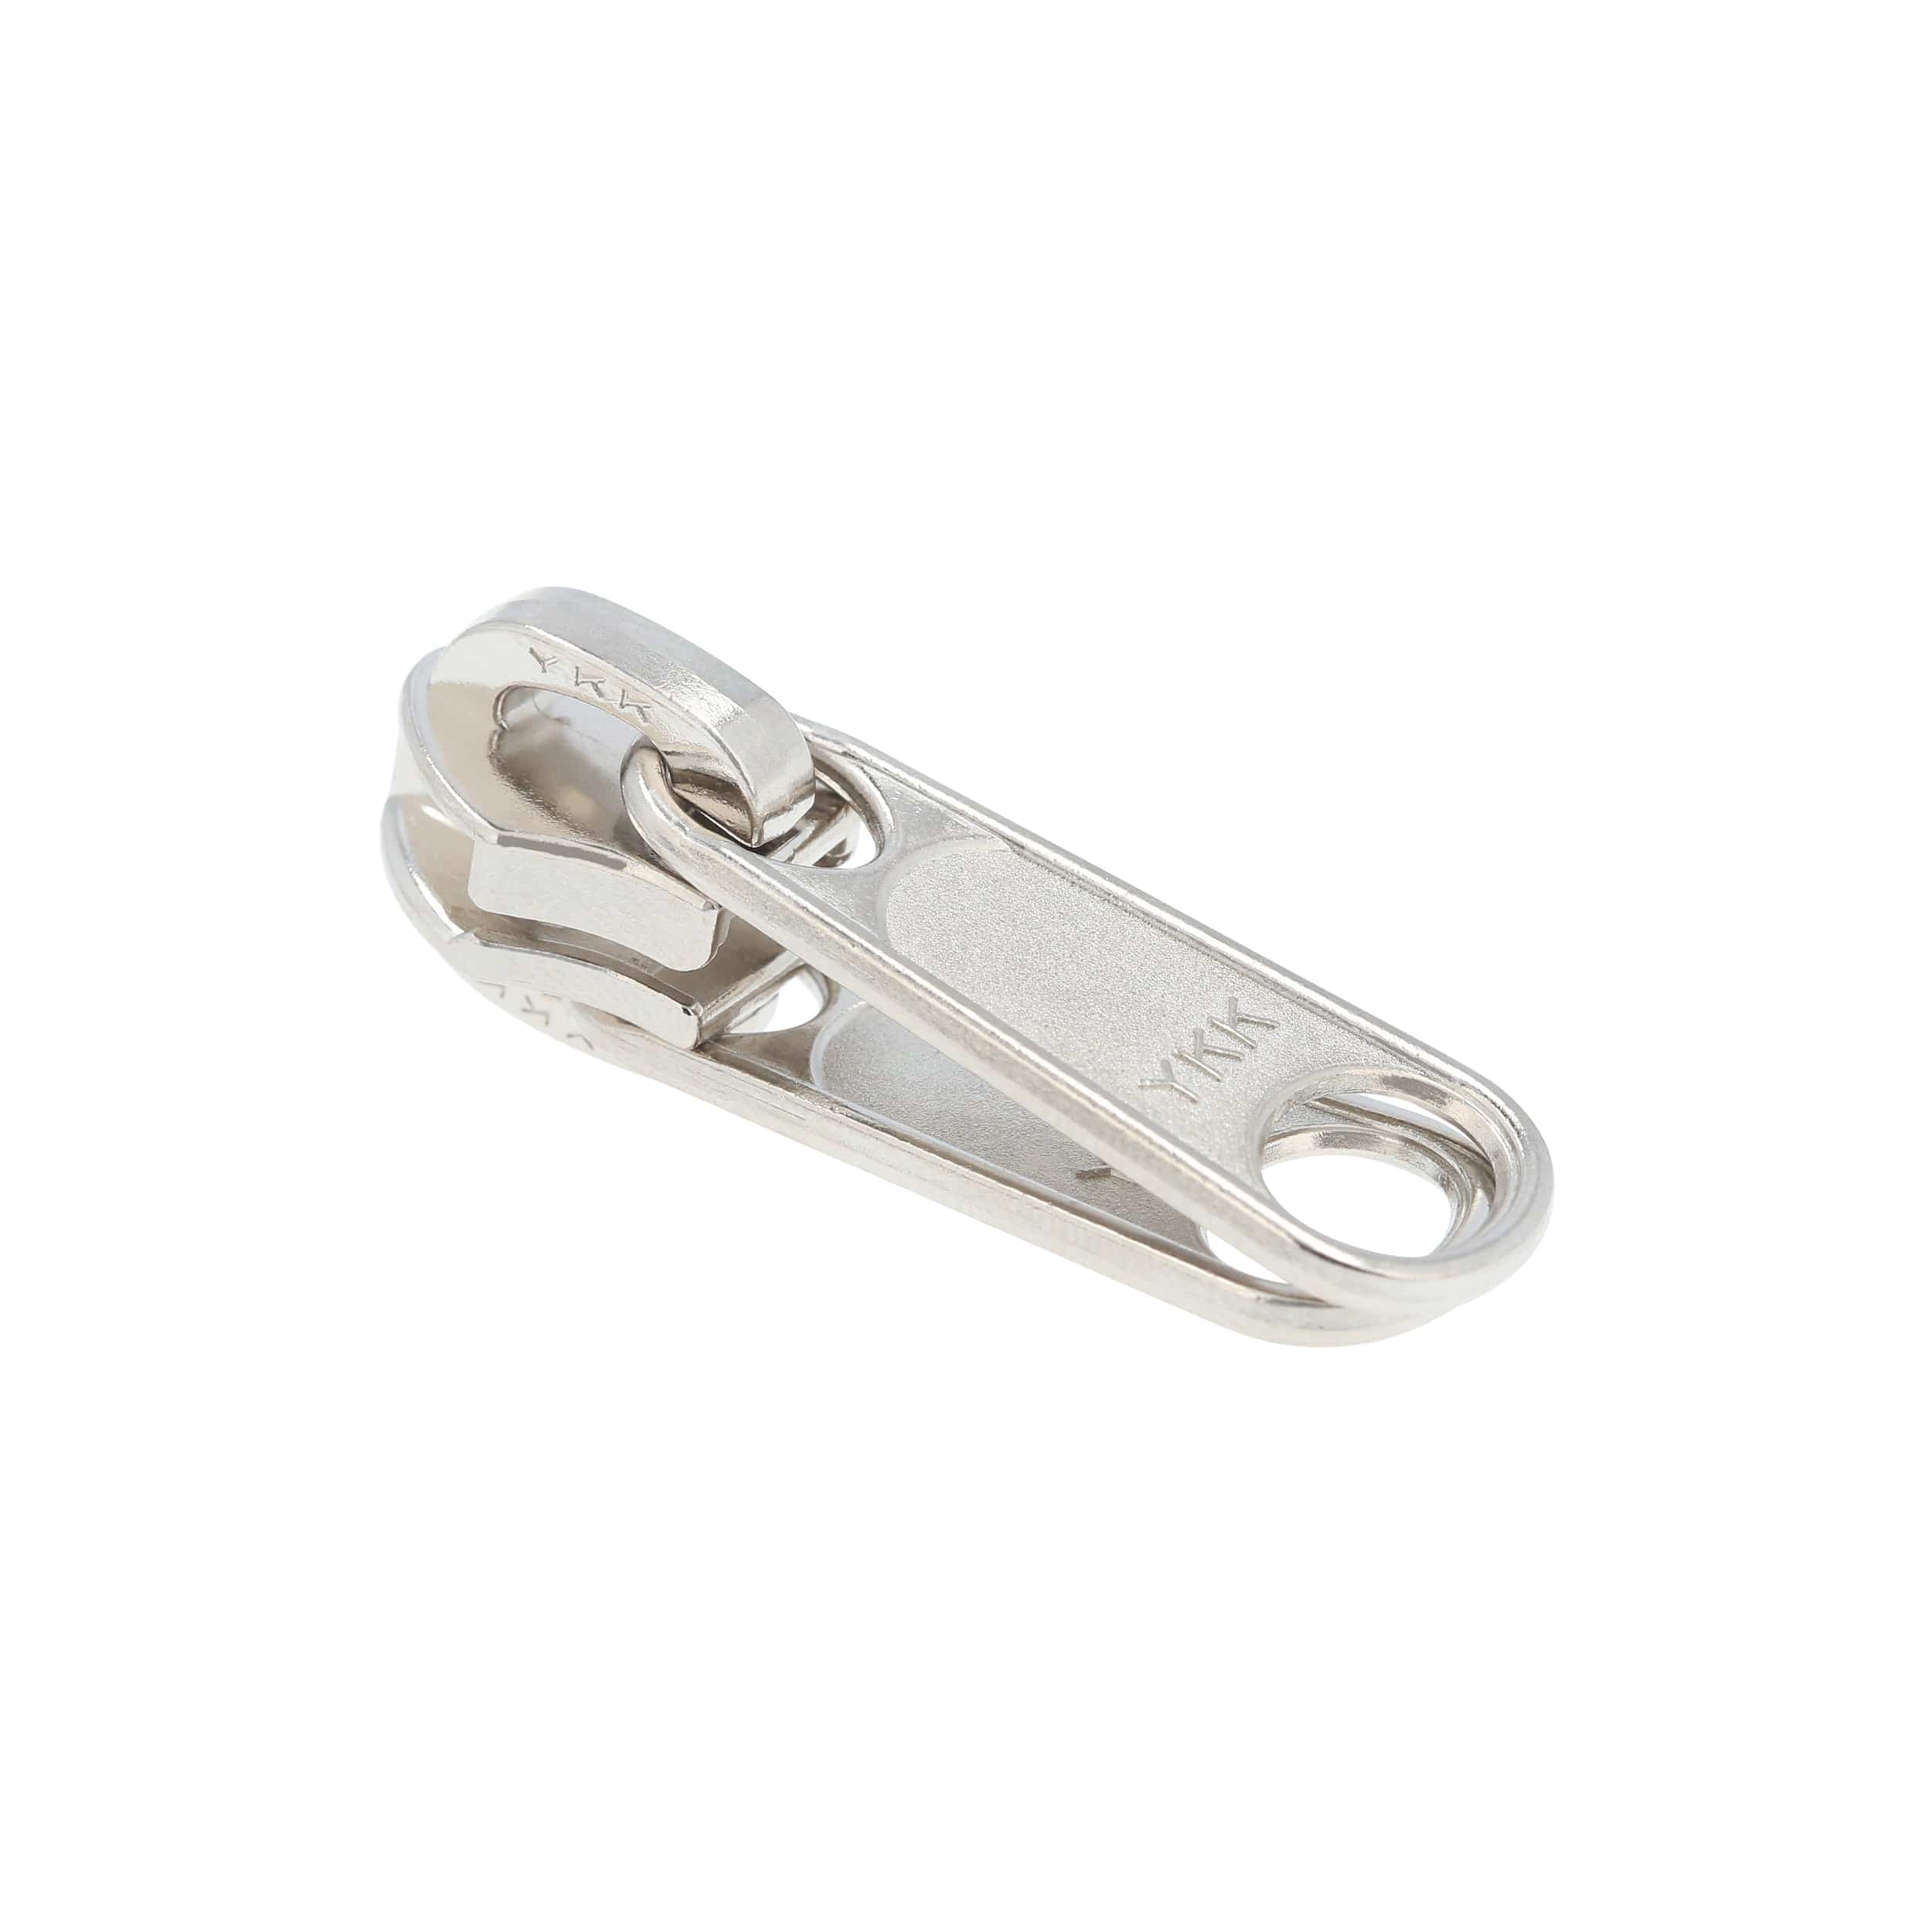 Zipper Pull pull-tab Replacement Nickel or Brass for 